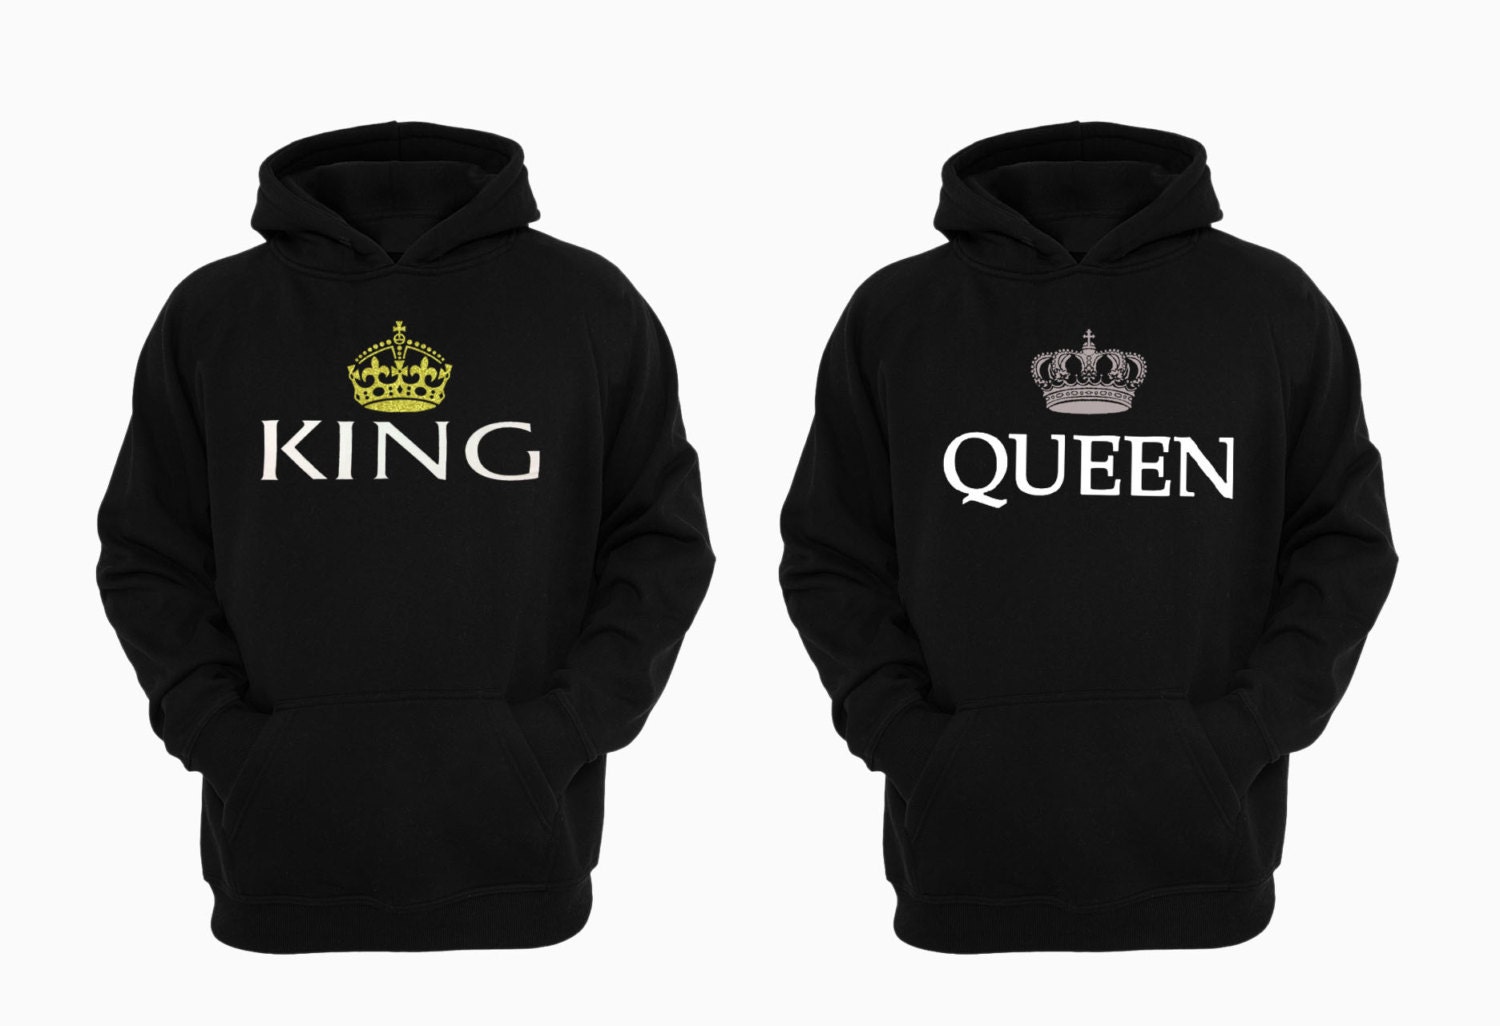 Couples Matching King and Queen with Crowns Cute by FreshteesNY